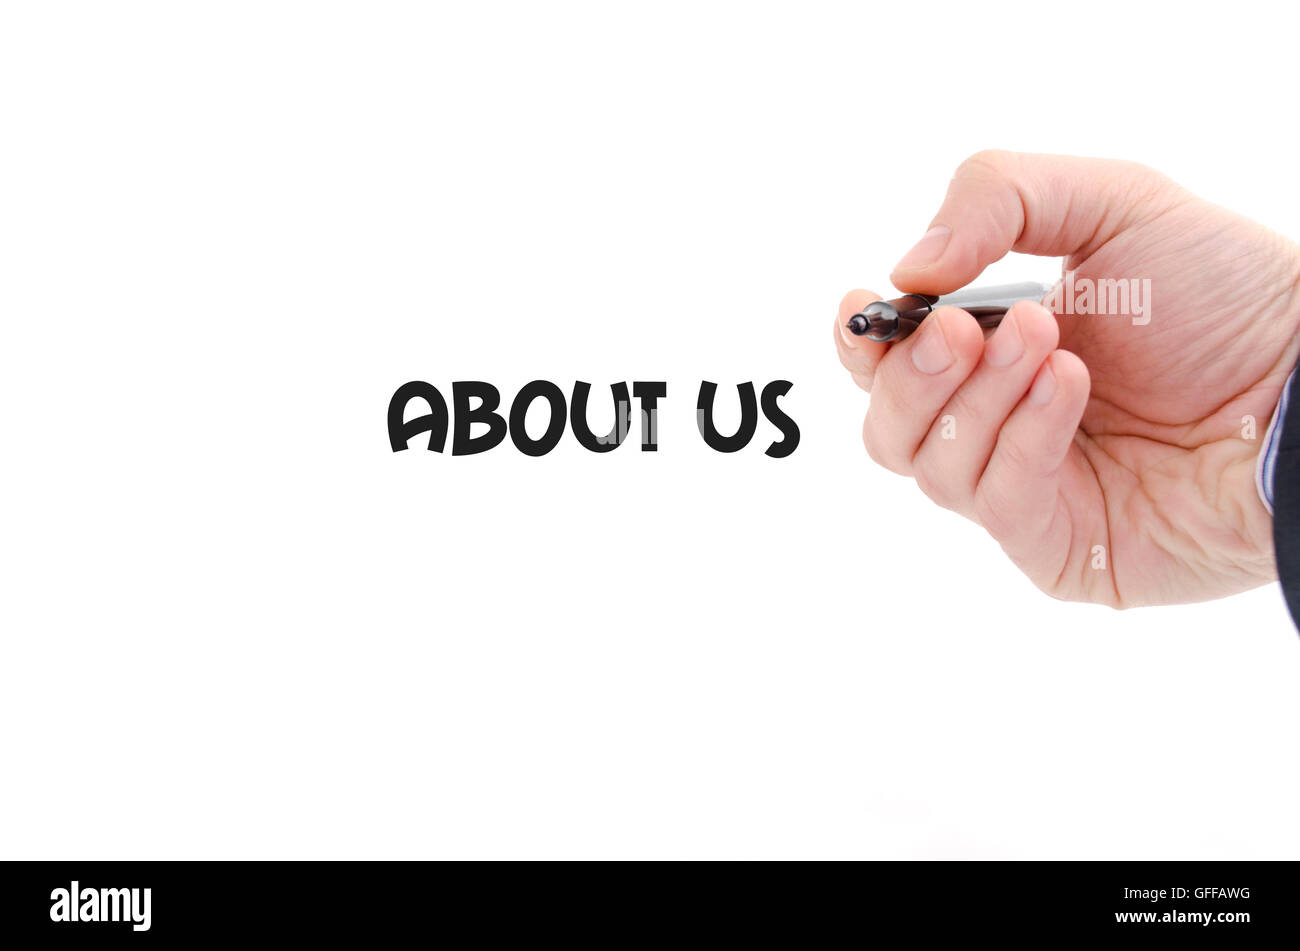 About us text concept isolated over white background Stock Photo